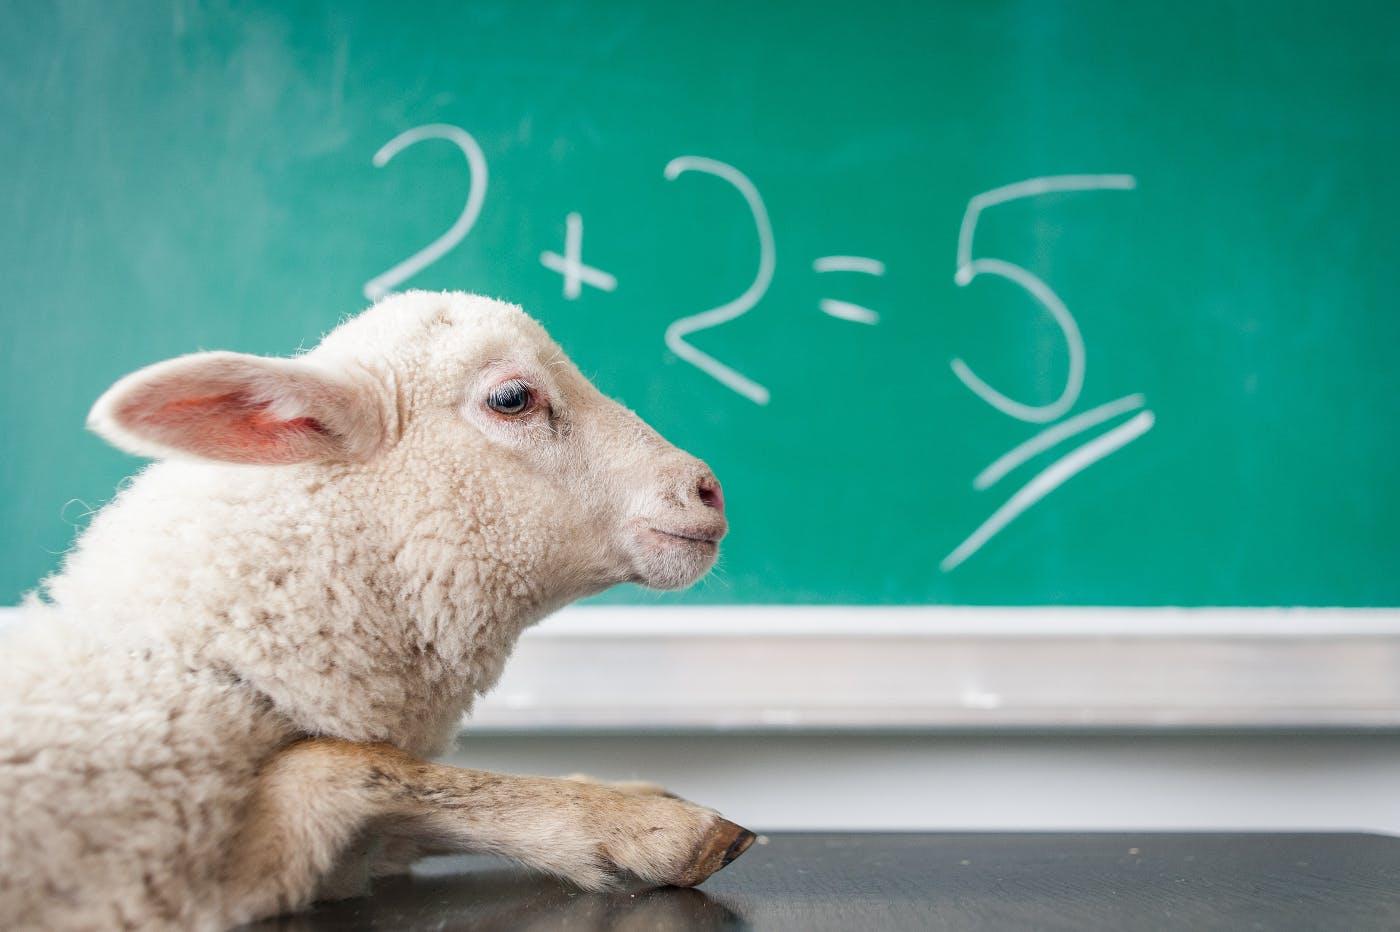 A sheep on a school desk in front of a chalk board. On the board is 2 + 2 = 5.